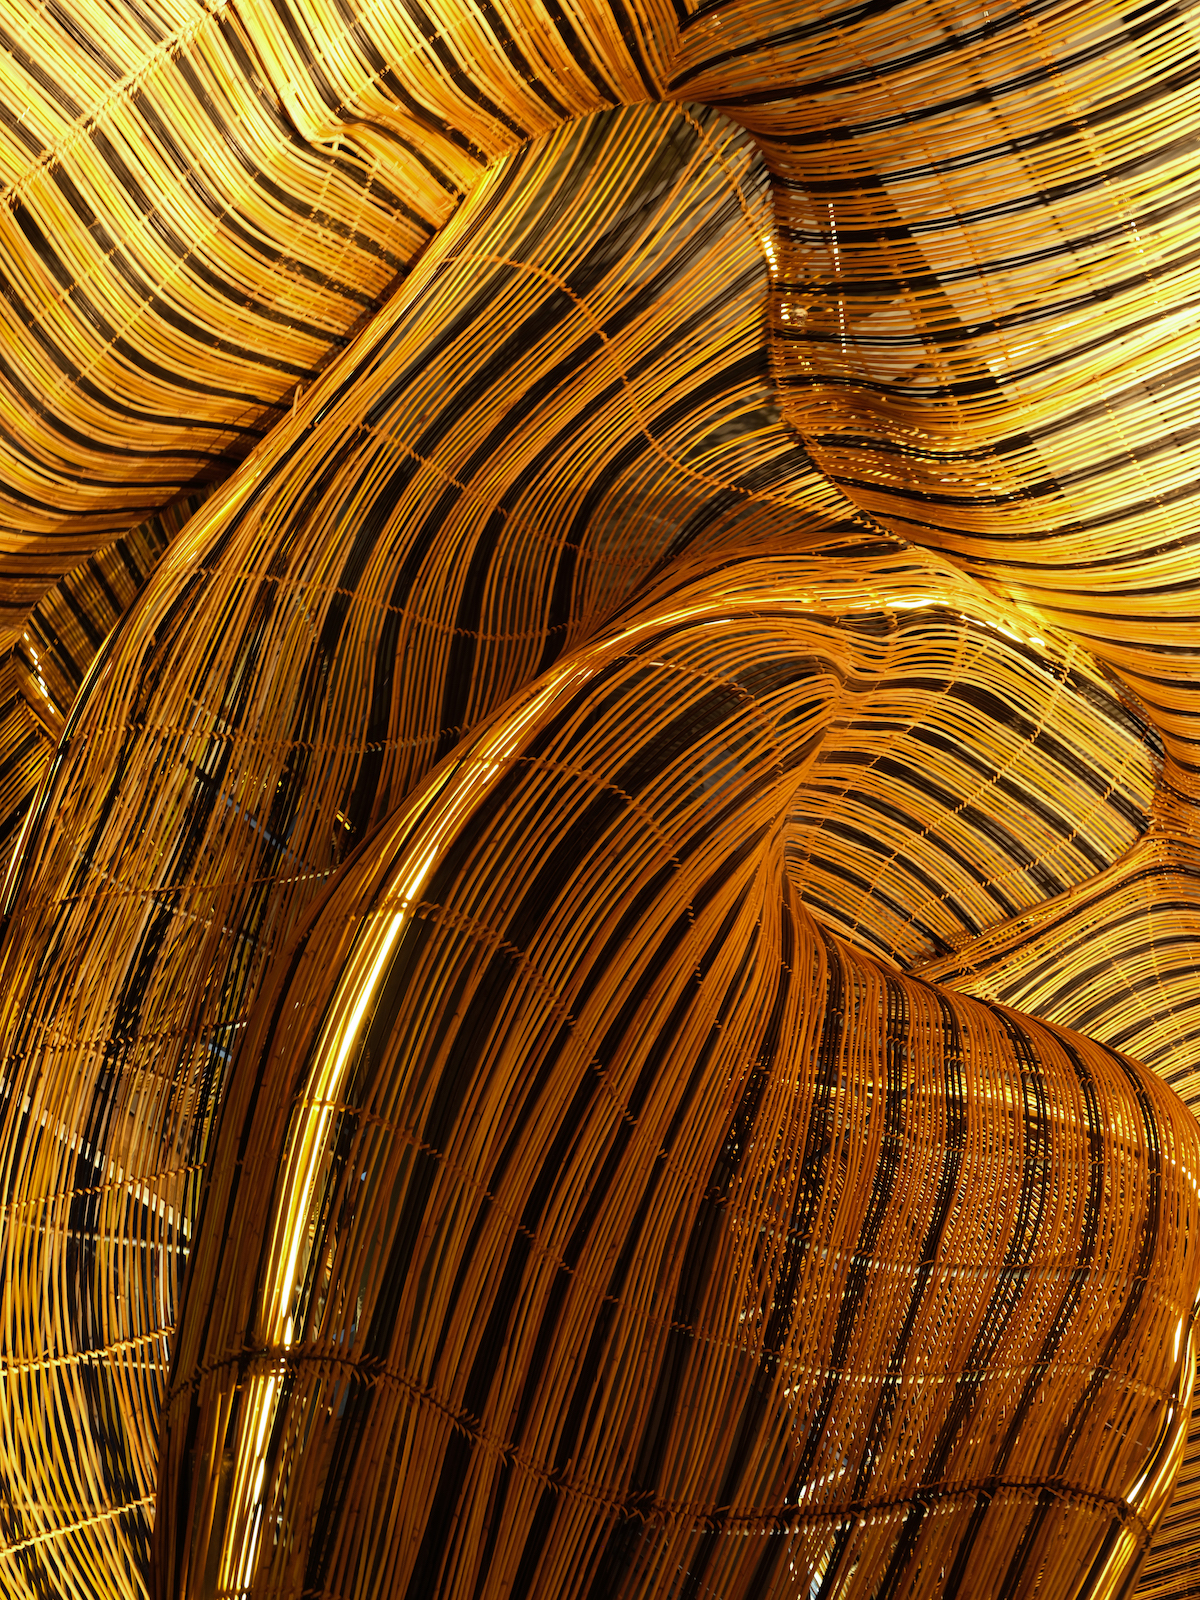 Architects Blend Technology and Craftsmanship to Create These Treelike Rattan Columns